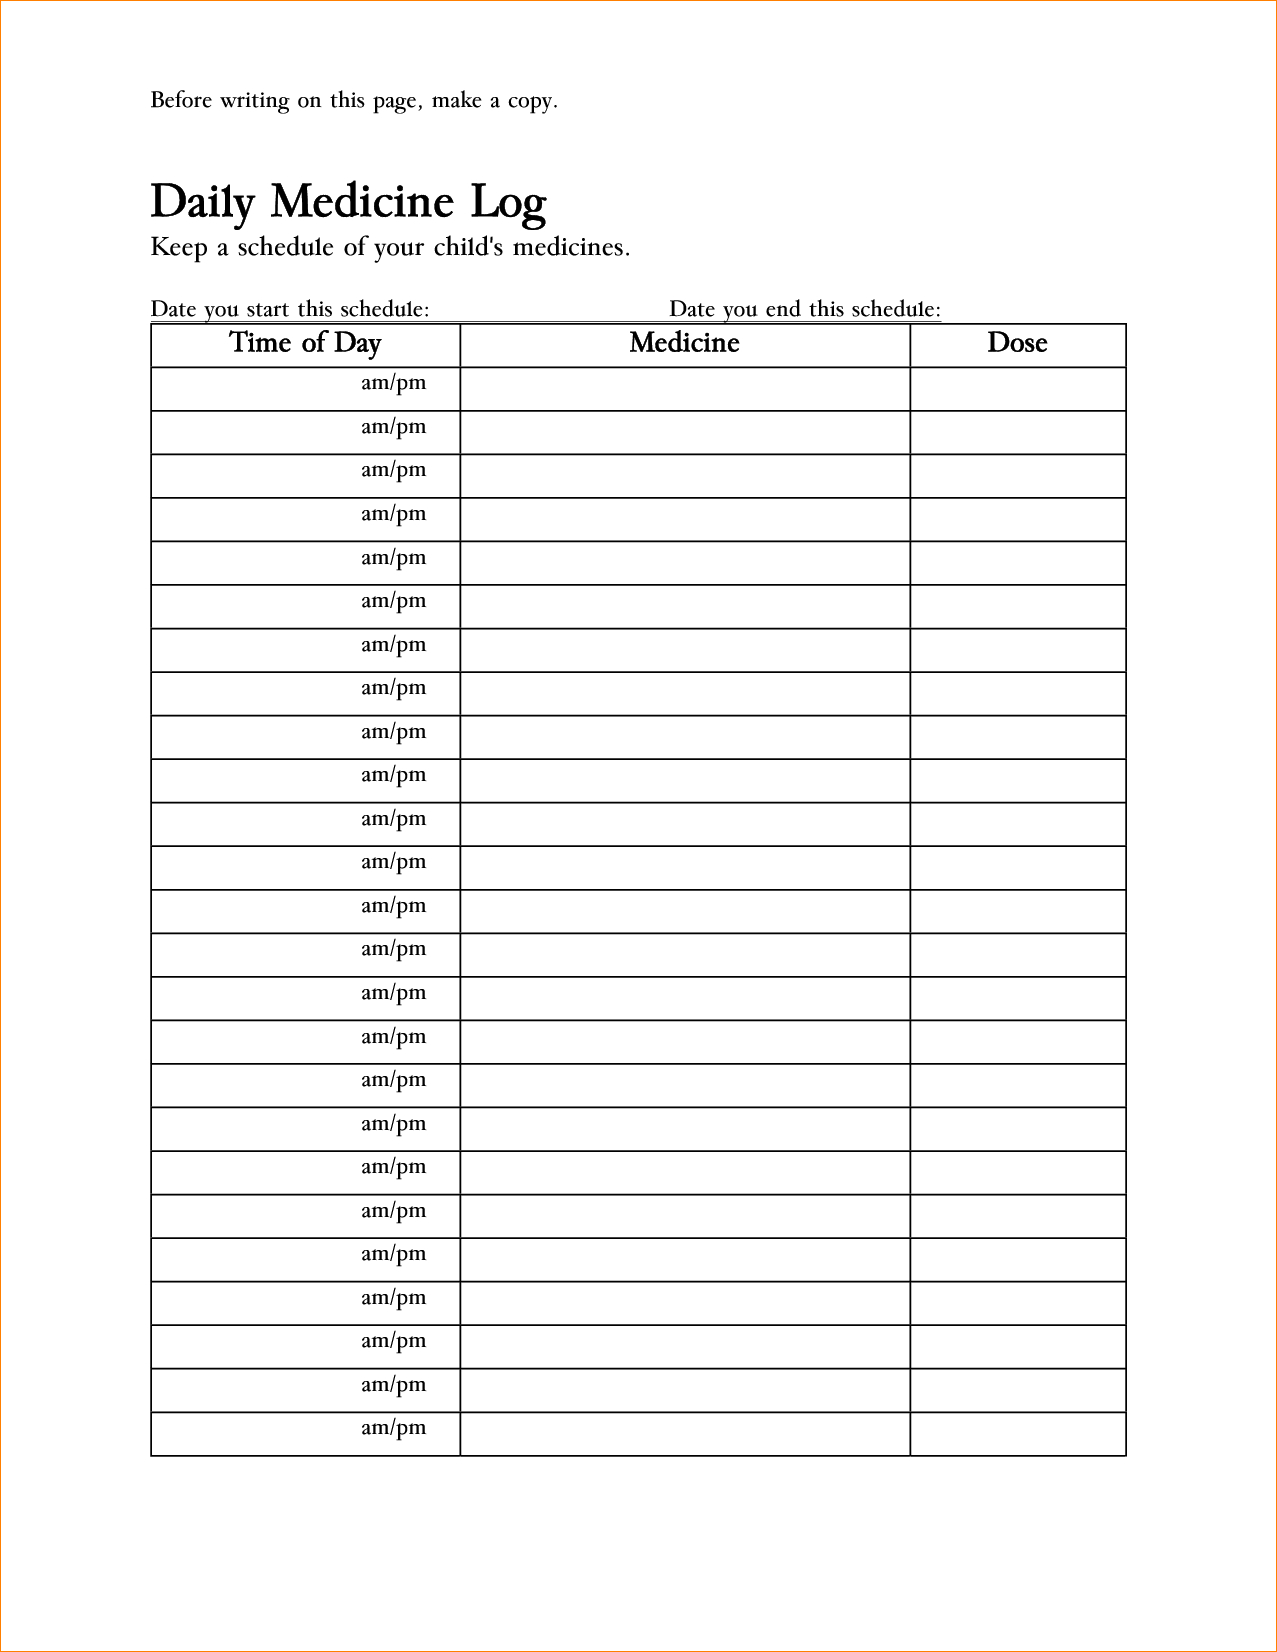 free-medication-administration-record-template-excel-yahoo-image